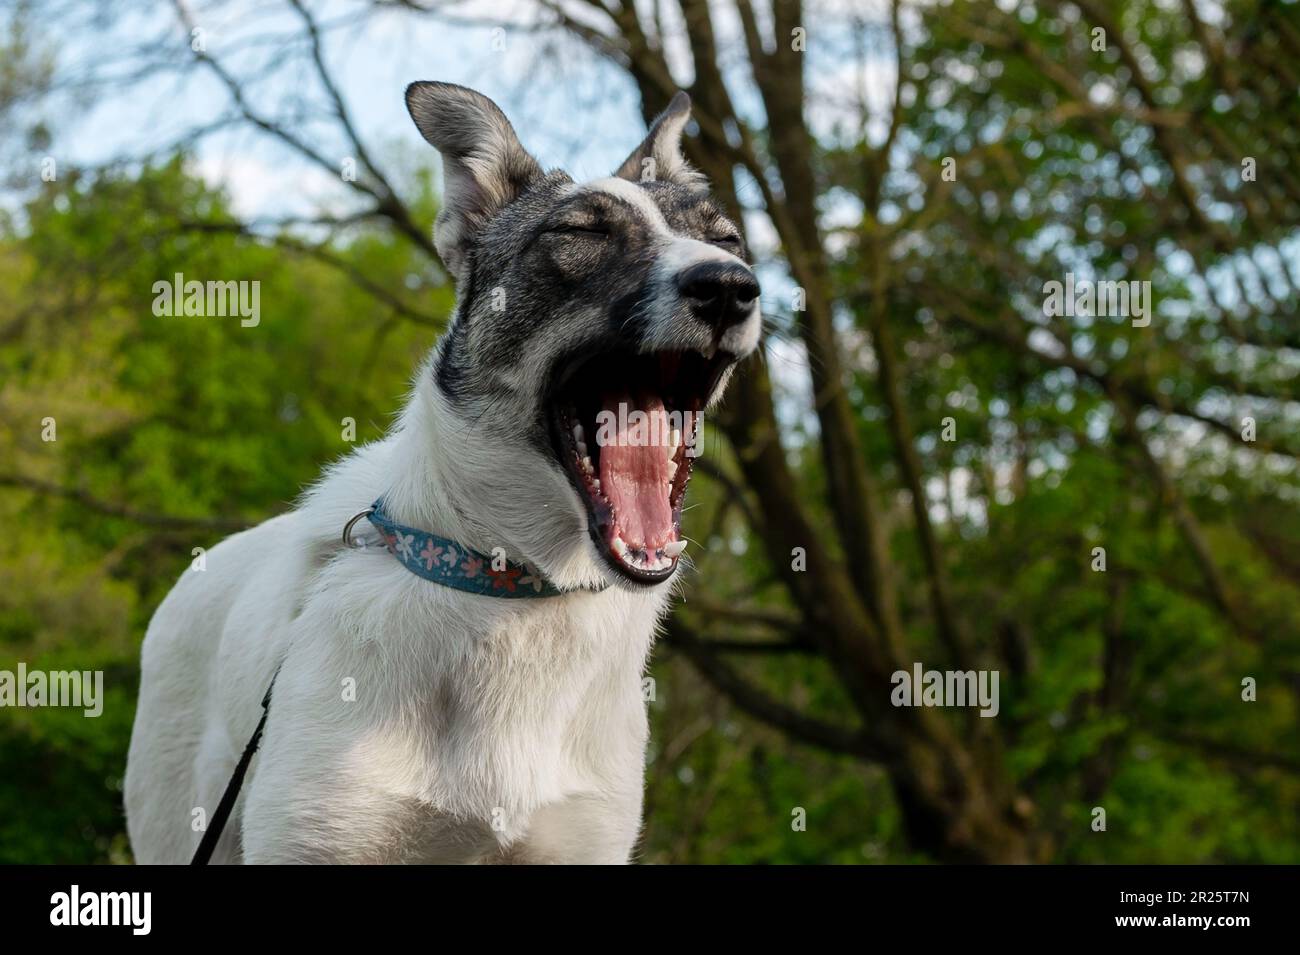 Yawning dog. Portrait of a mongrel dog in nature. Closeup photo of an adorable dog. Stock Photo